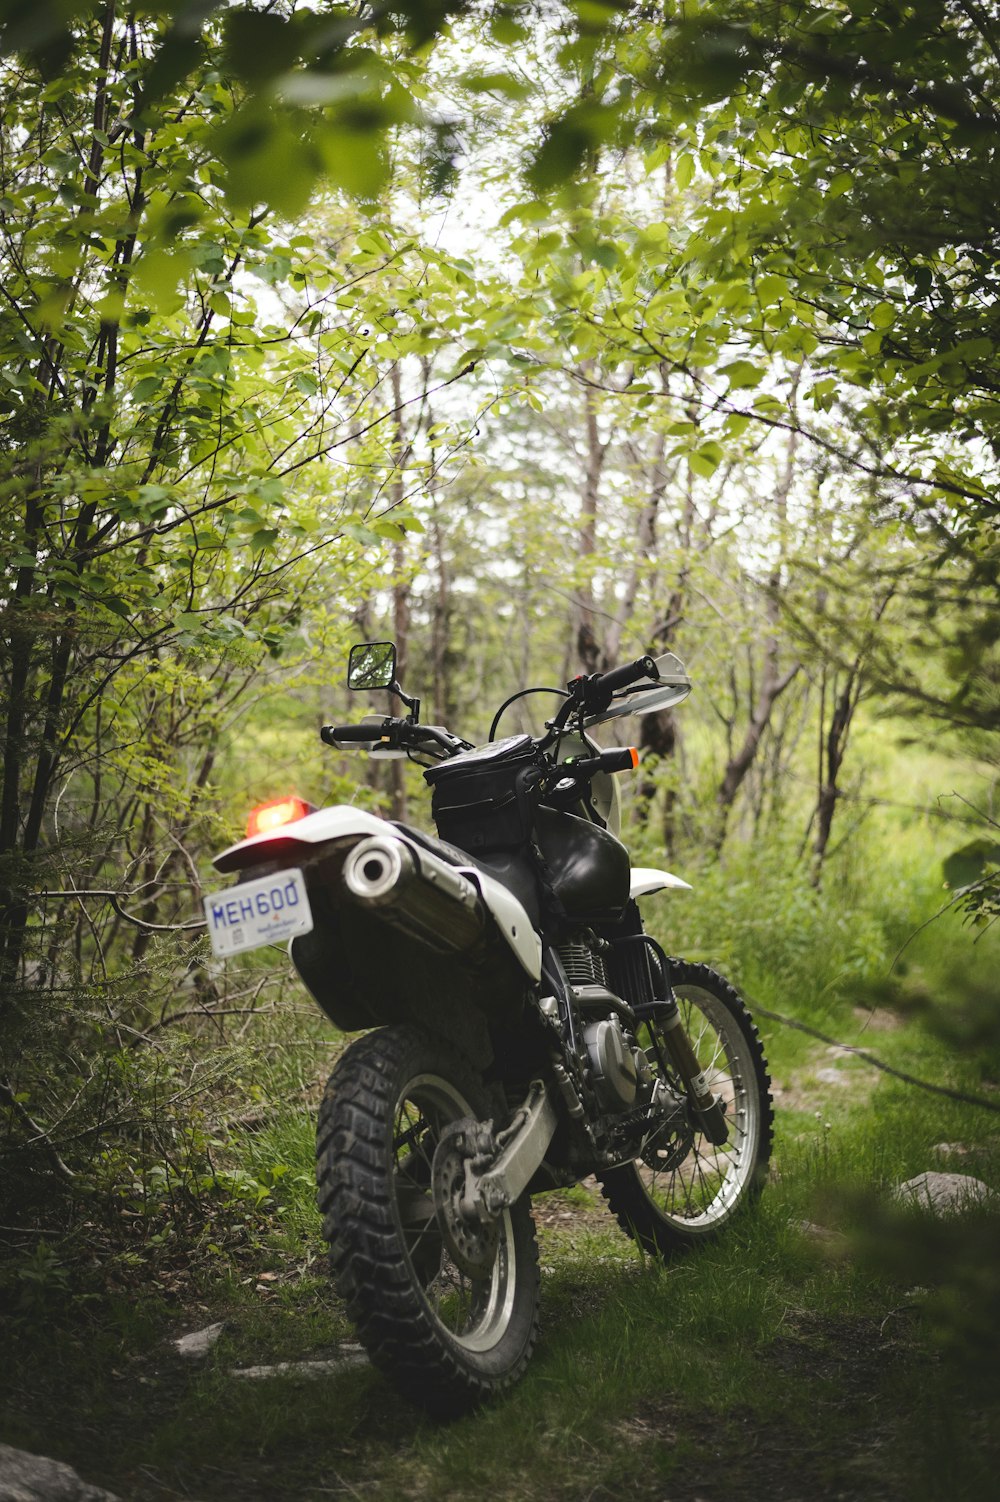 black and white motorcycle in forest during daytime